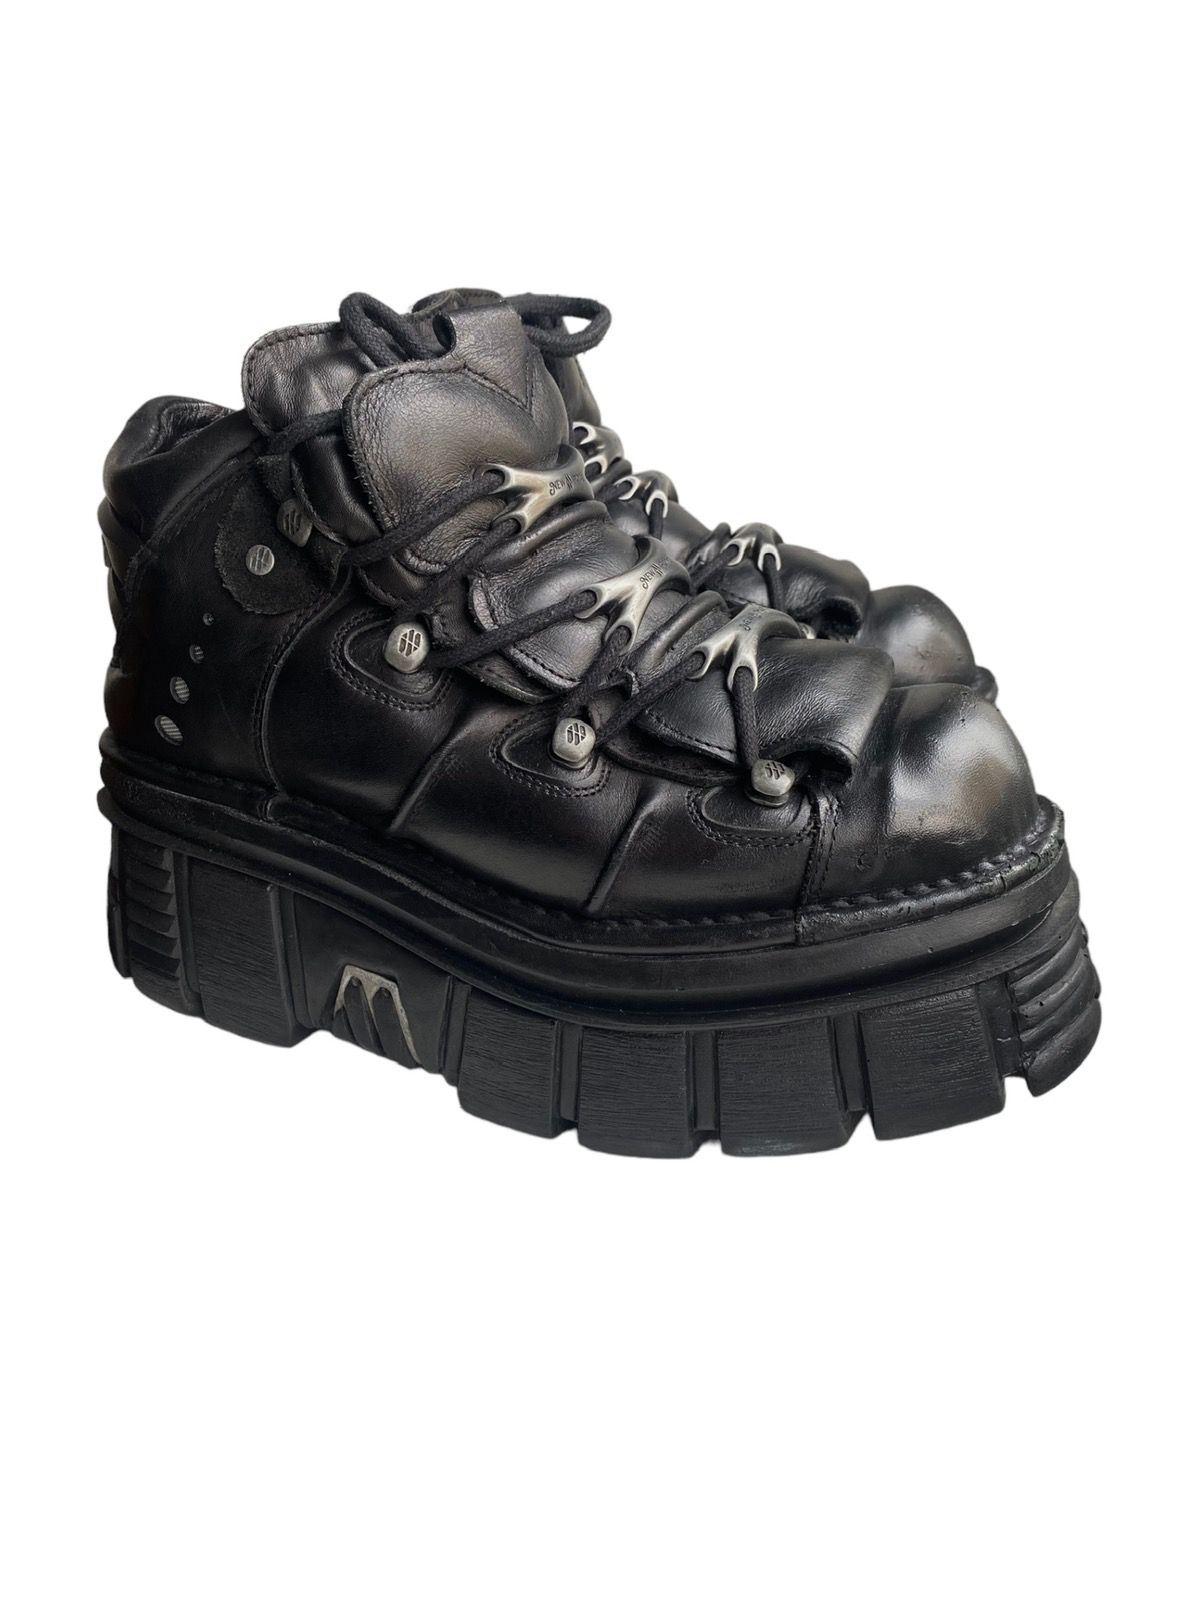 Pre-owned Archival Clothing X Avant Garde New Rock M106 Platform Boots In Black